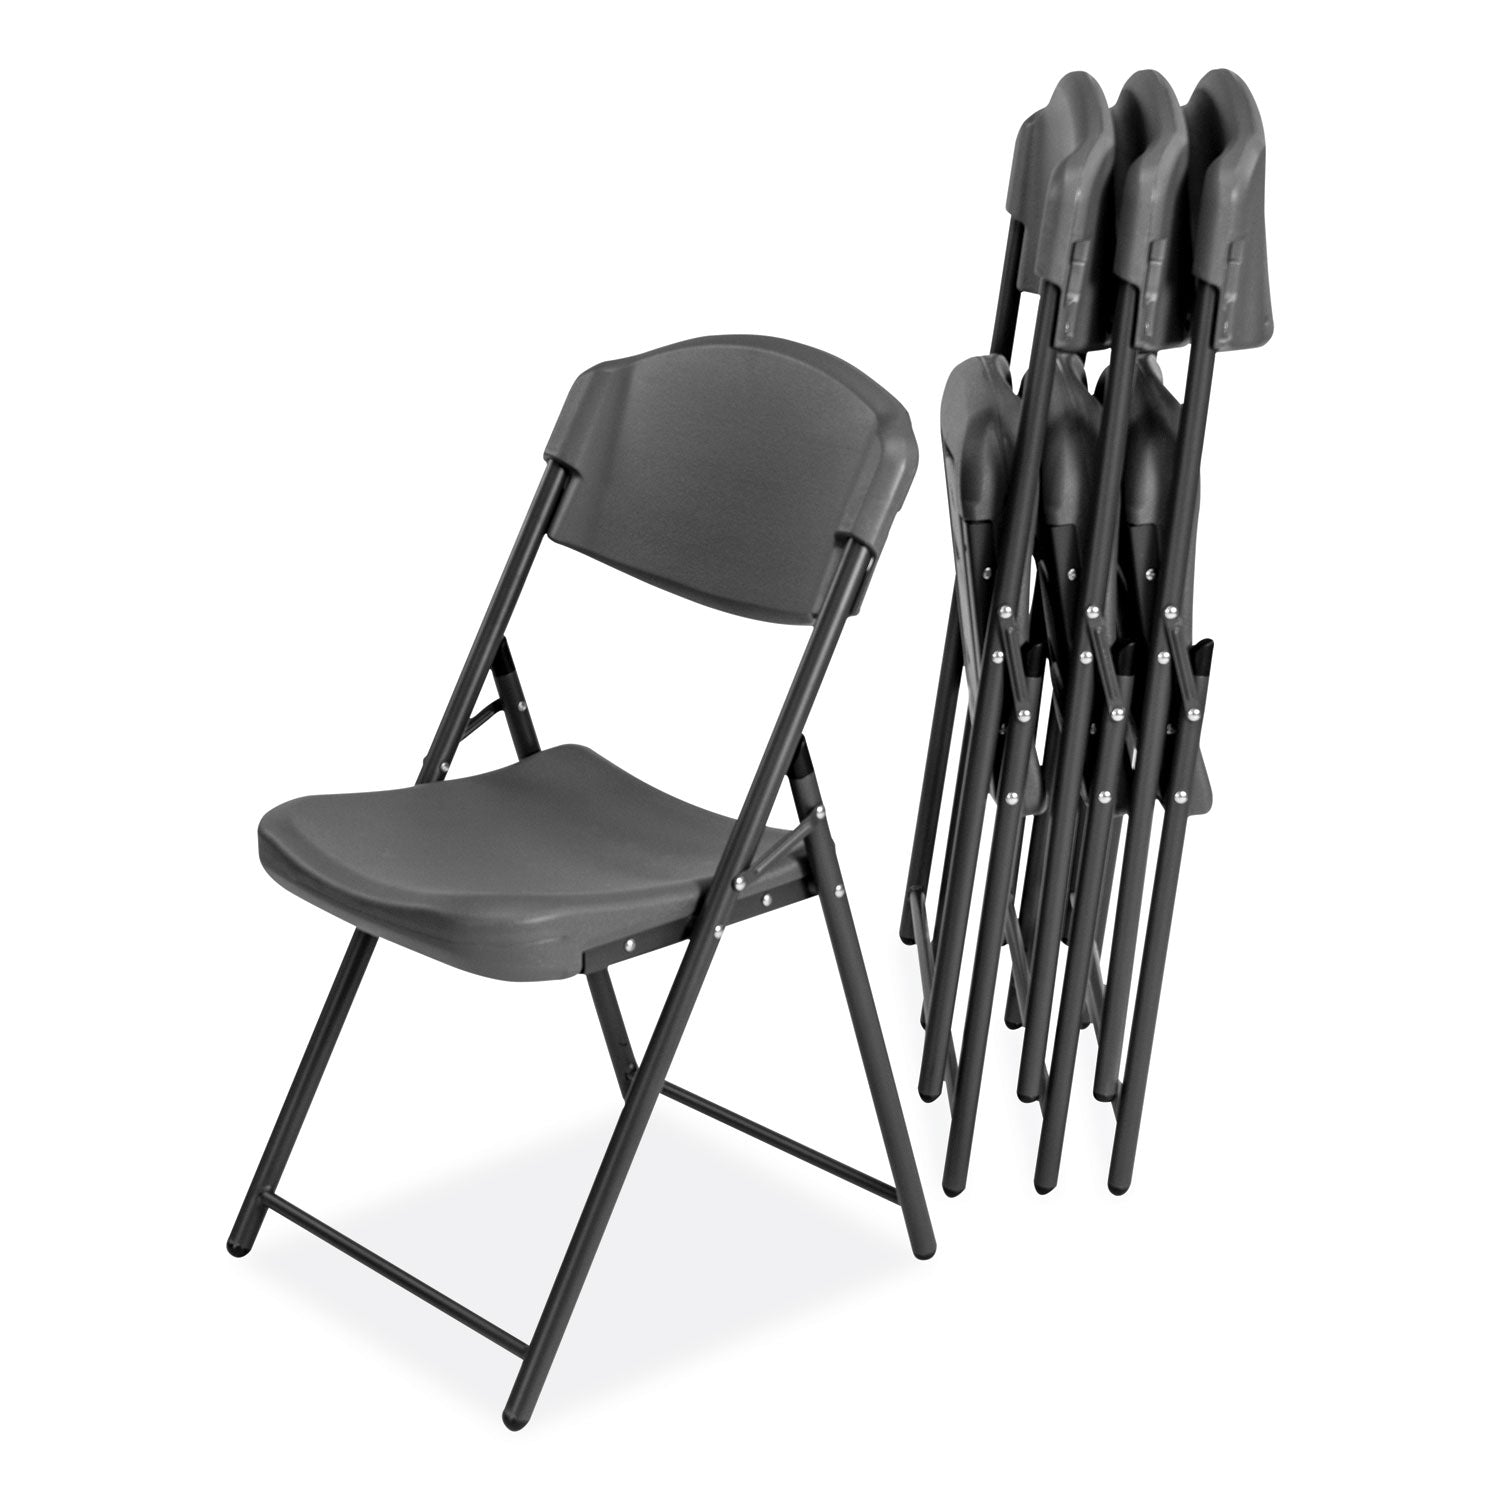 rough-n-ready-commercial-folding-chair-supports-up-to-350-lb-18-seat-height-charcoal-seat-back-charcoal-base-4-pack_ice64037 - 1